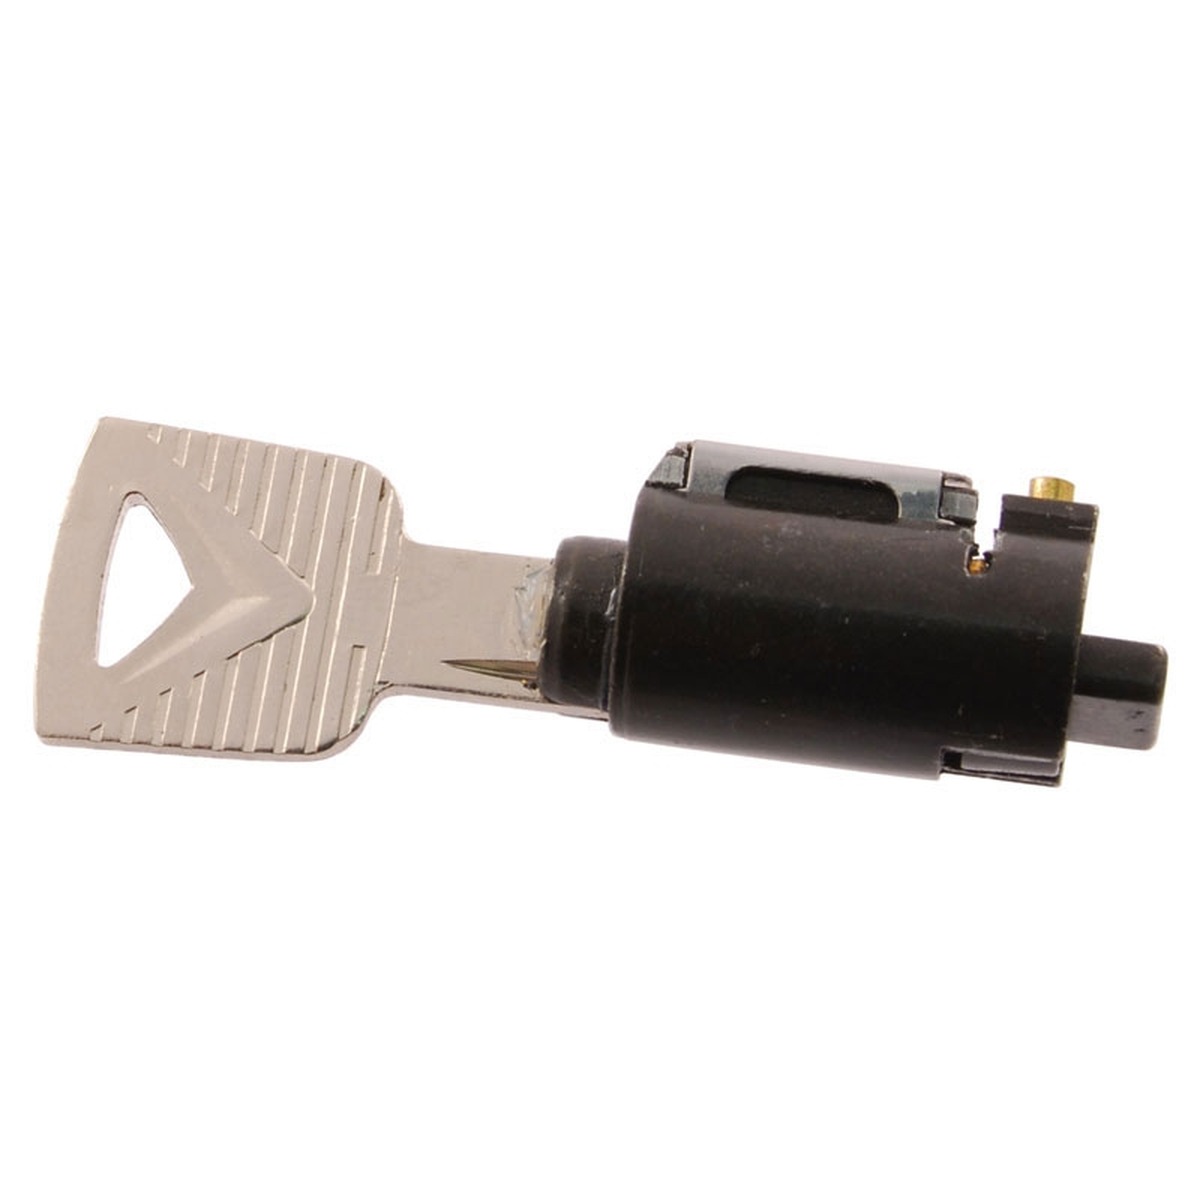 Ignition & related parts - Ignition lock cyl & key - 1952-60 pas 1953-66 com